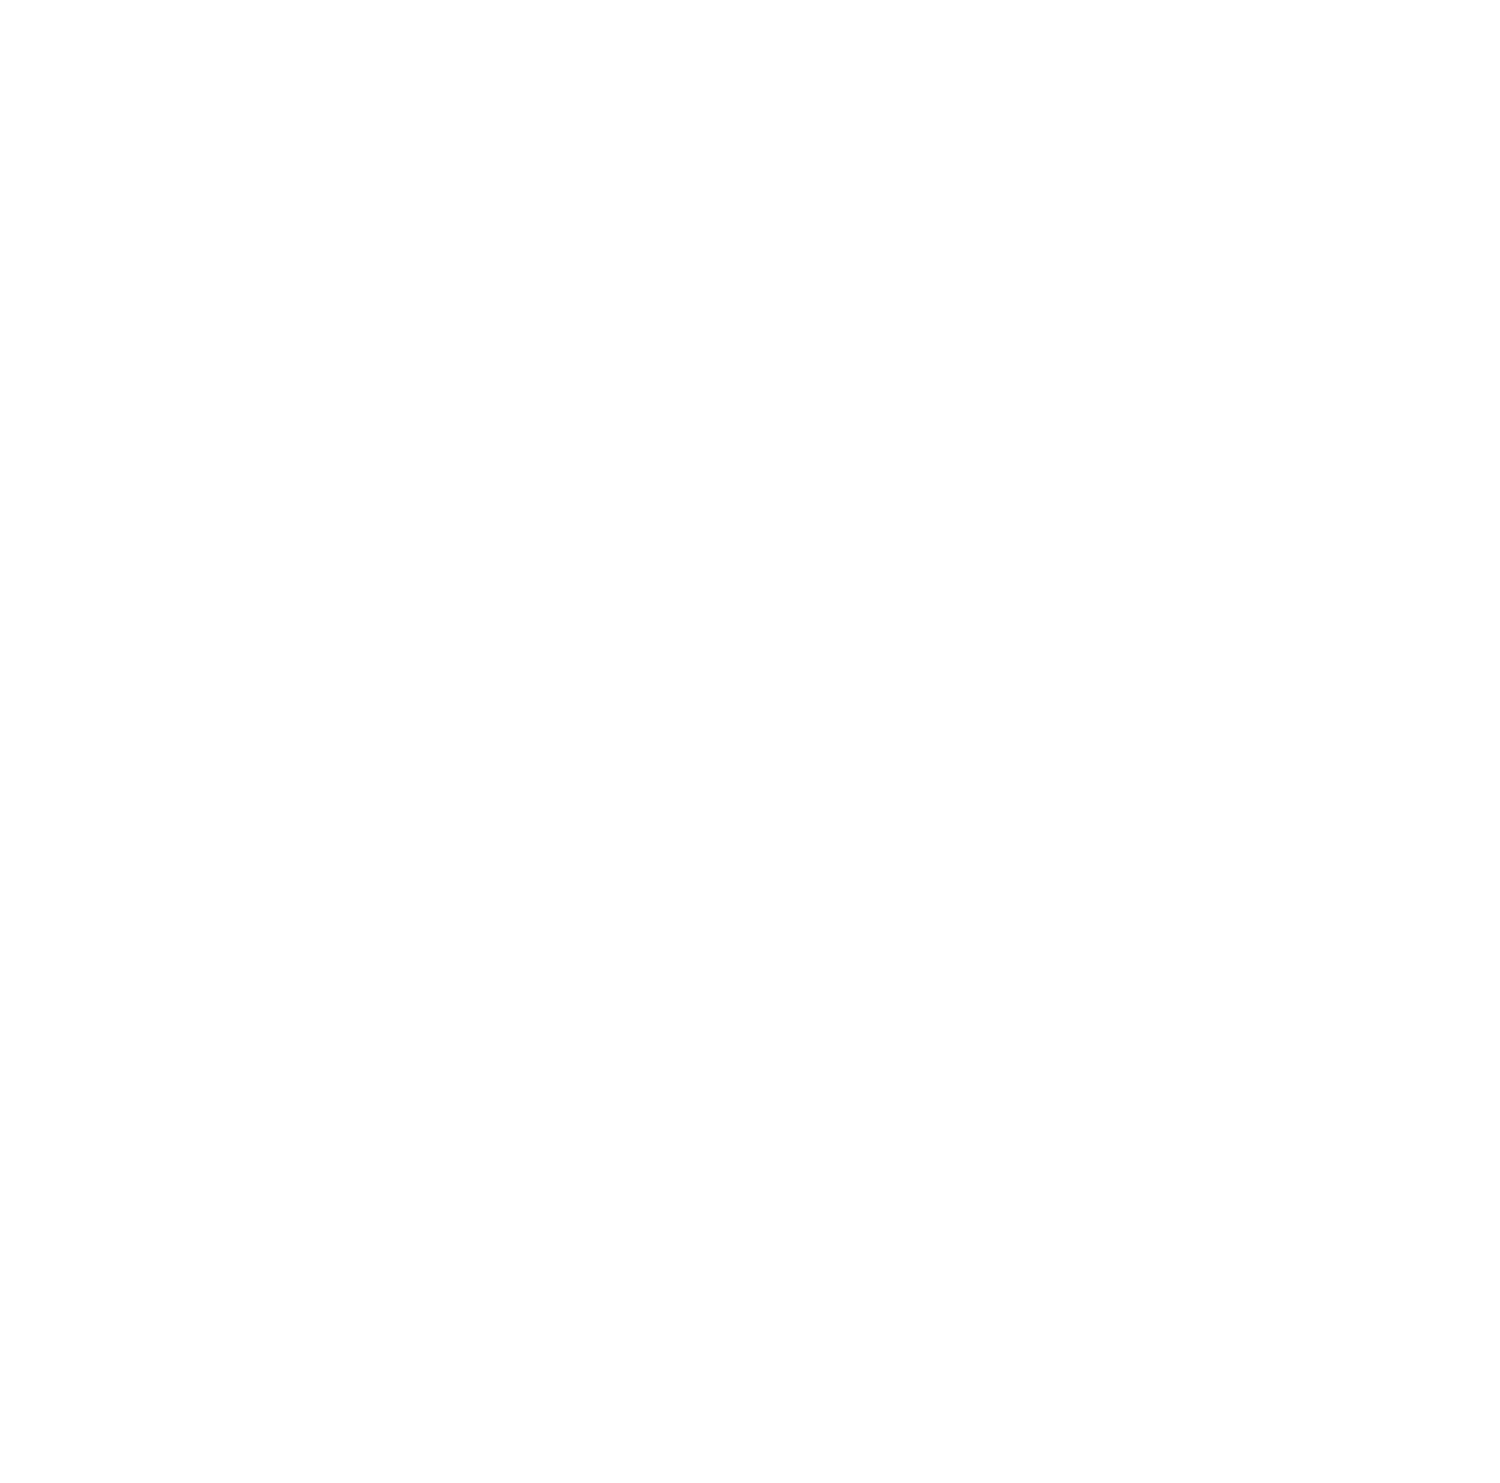 Empowered by Will